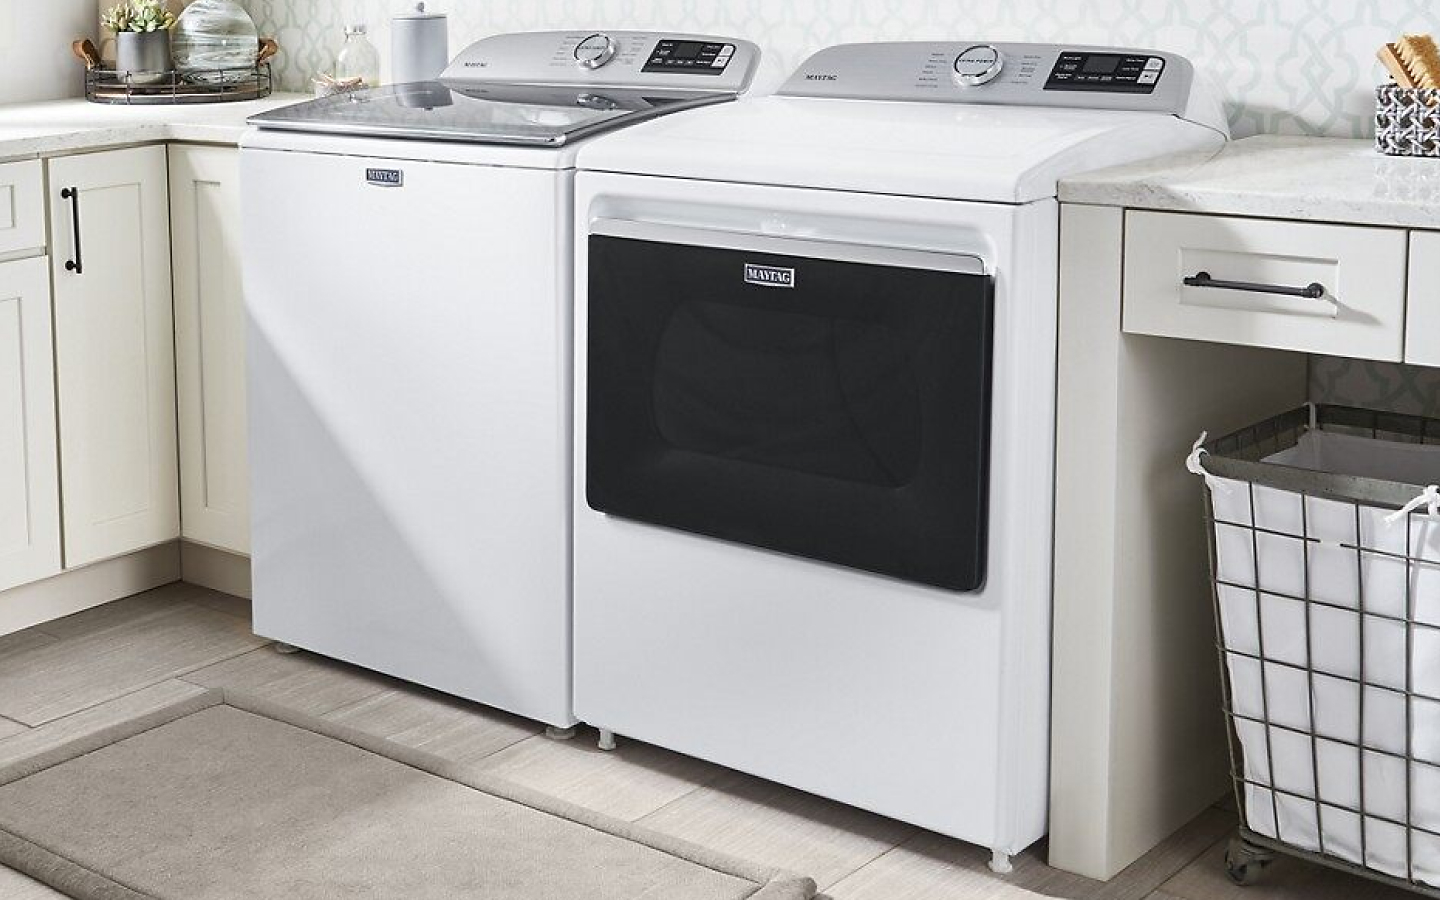 White MaytagⓇ top-load washer and dryer pair in white cabinetry